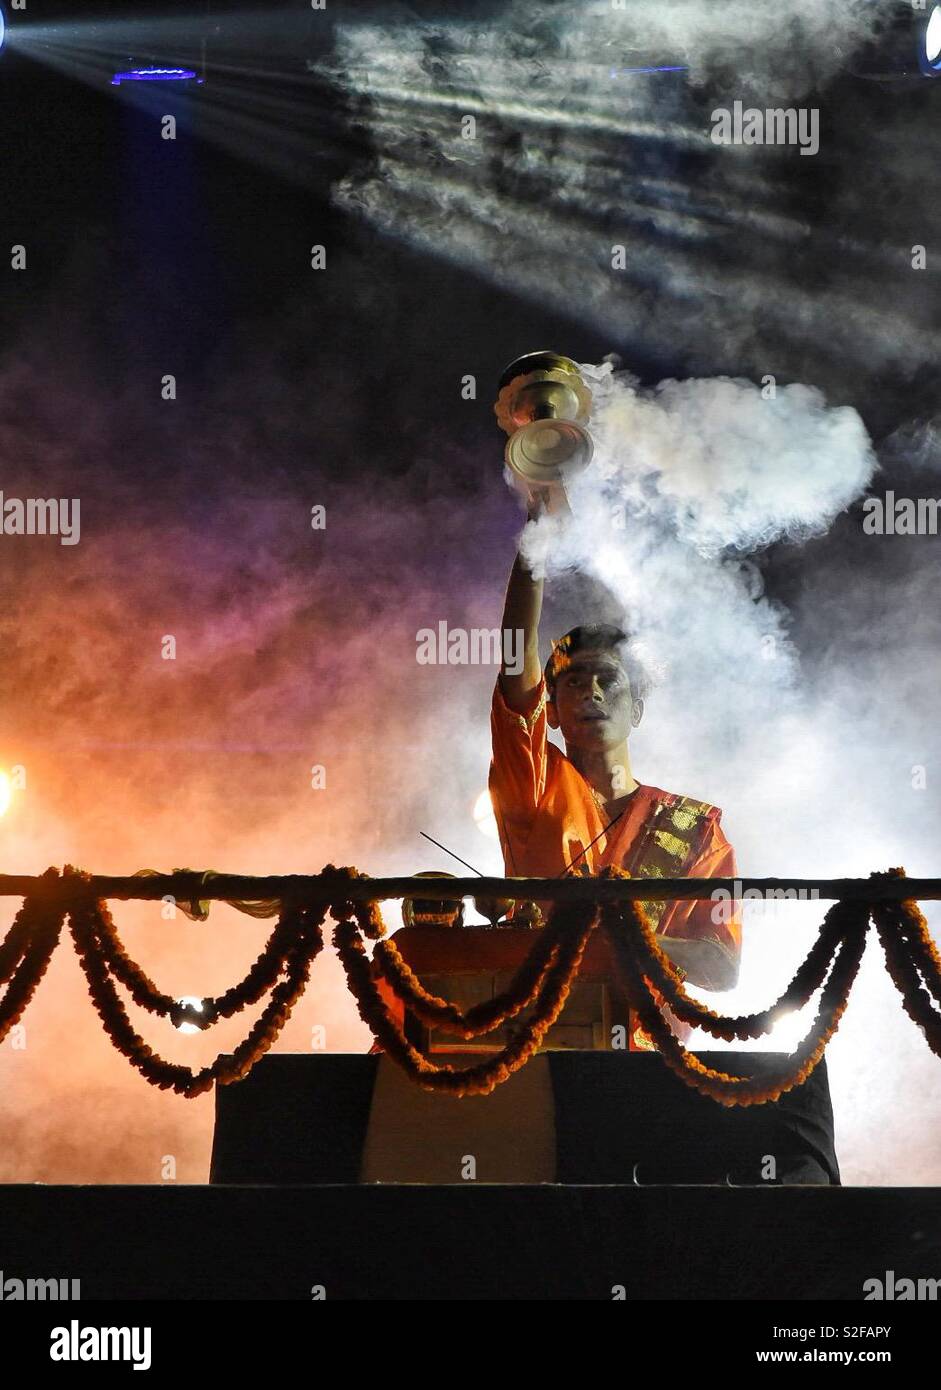 Magical moment at the Ganga Aarti at Varanasi, India. Evening Aarti is being conducted daily at the ghats in Varanasi to offer prayer to the holy river- Ganga. Stock Photo